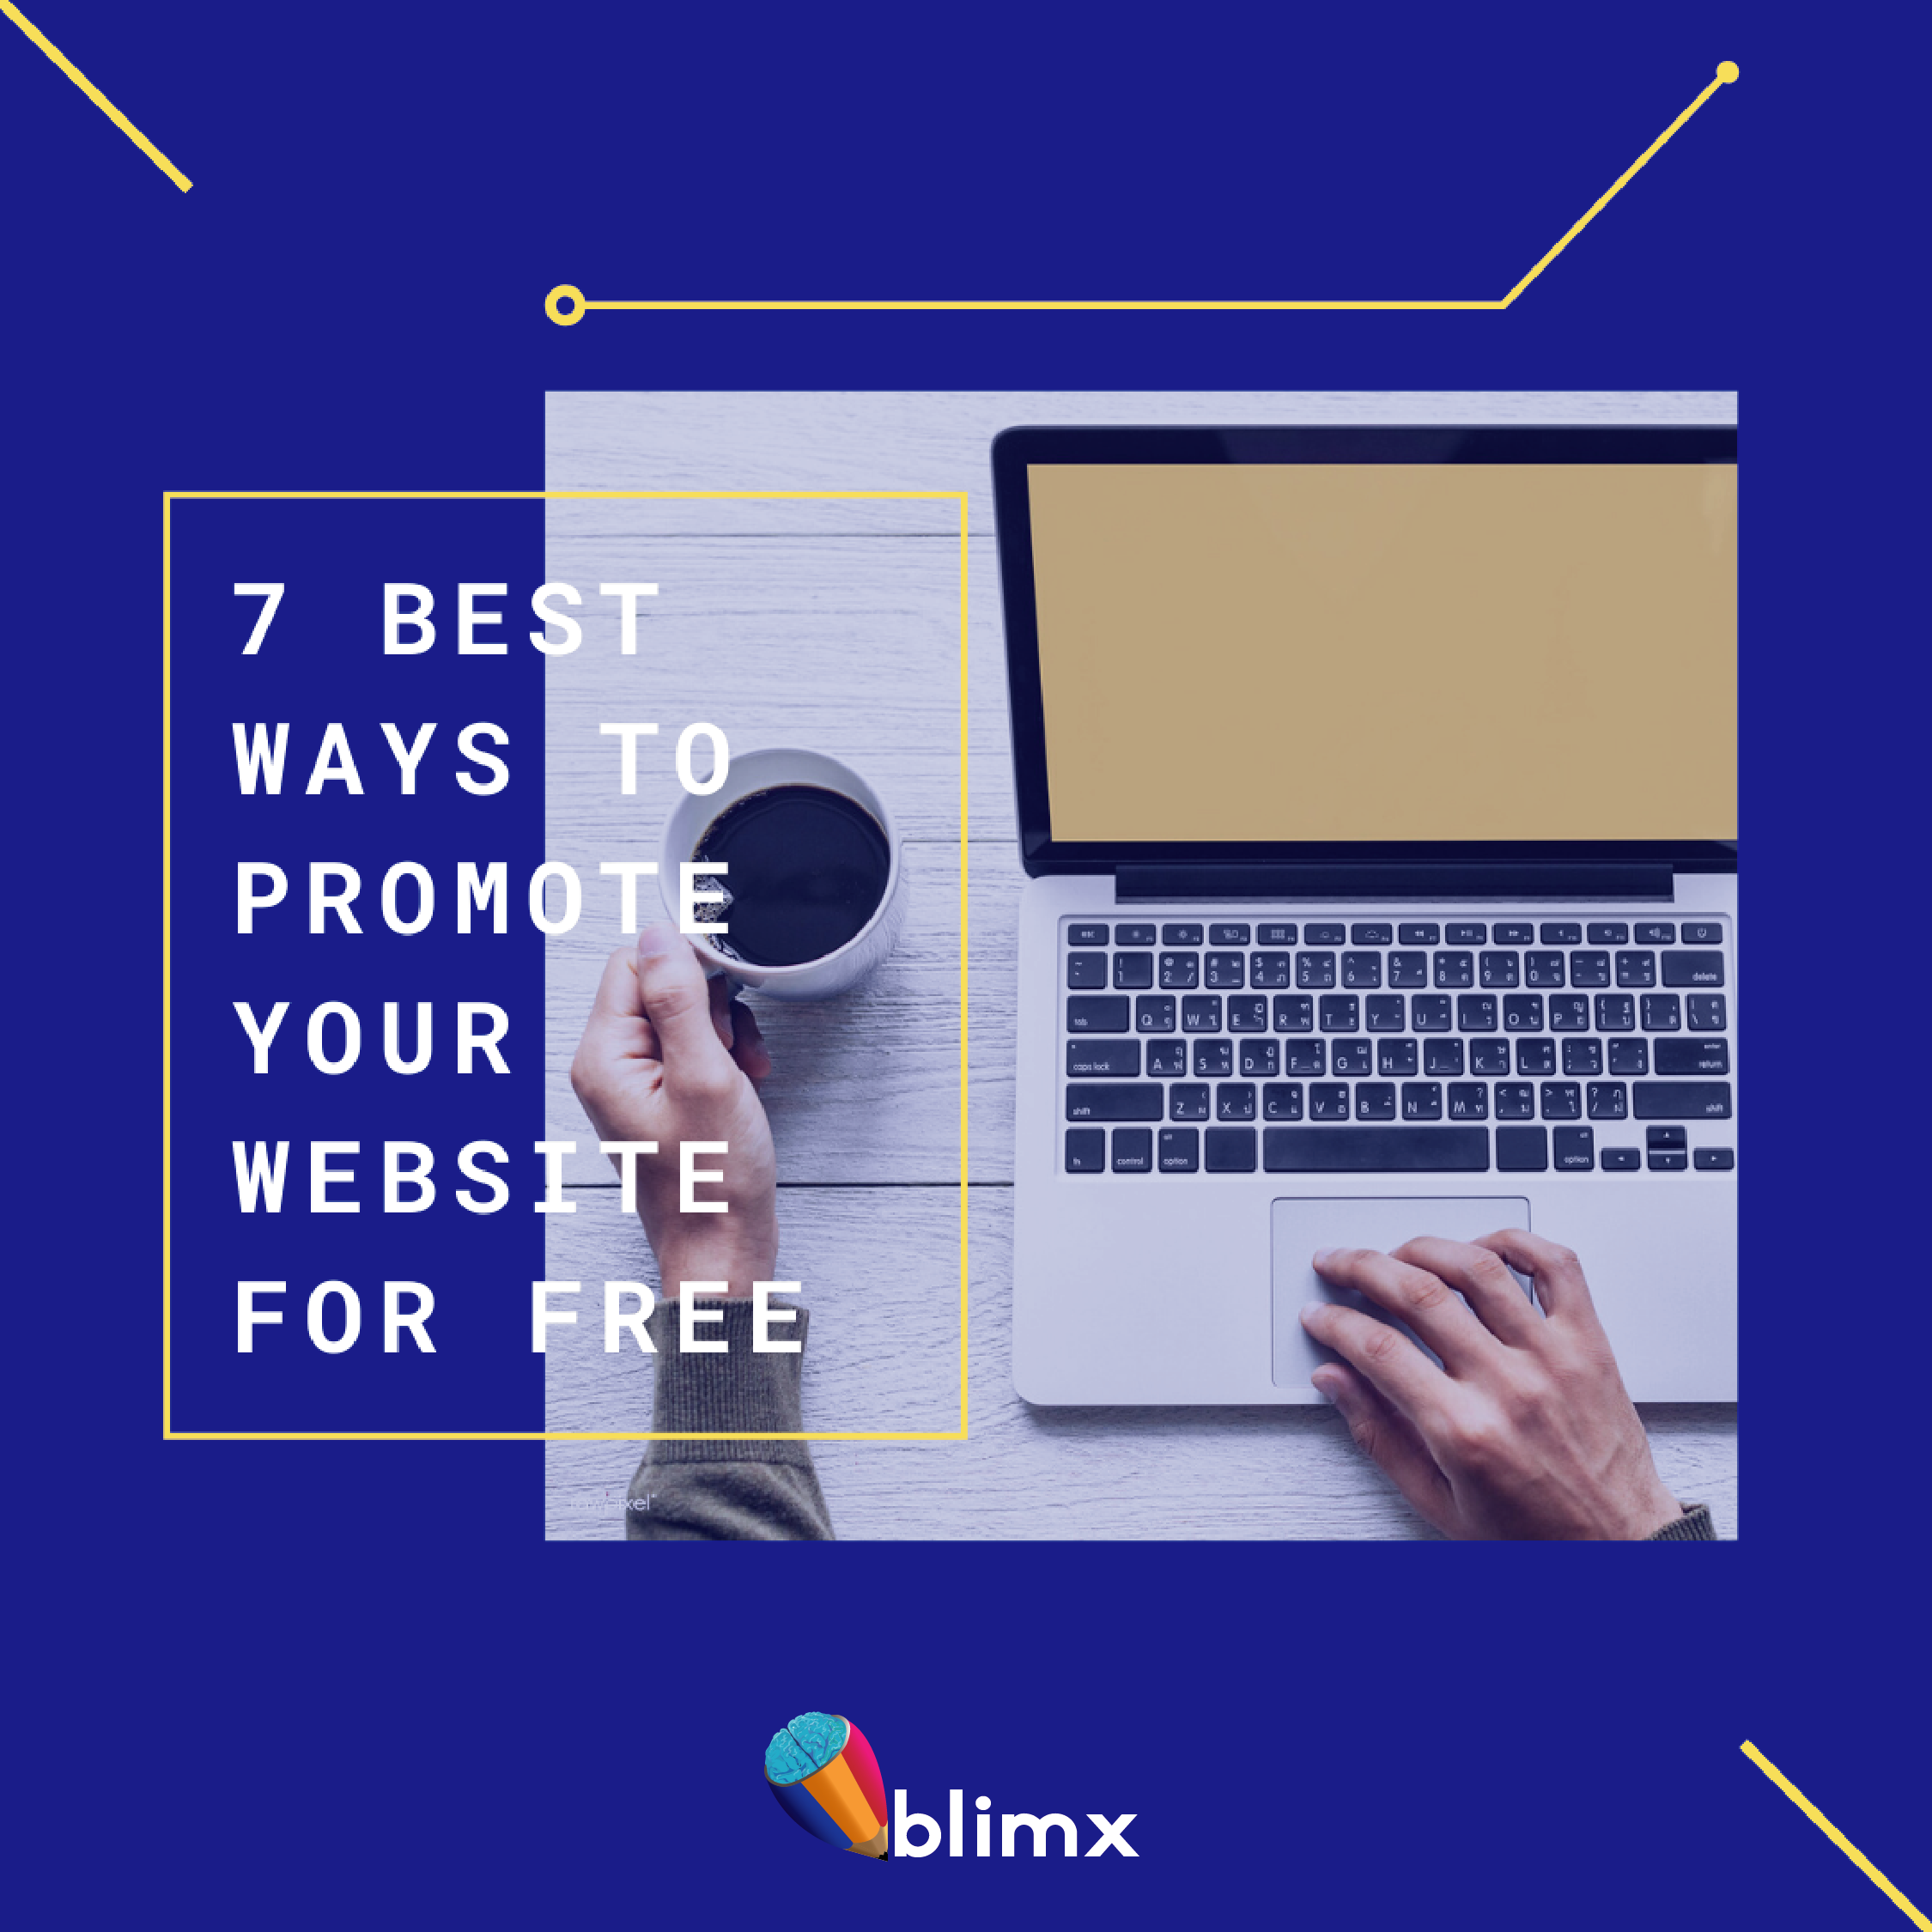 7 best ways to promote your website for free